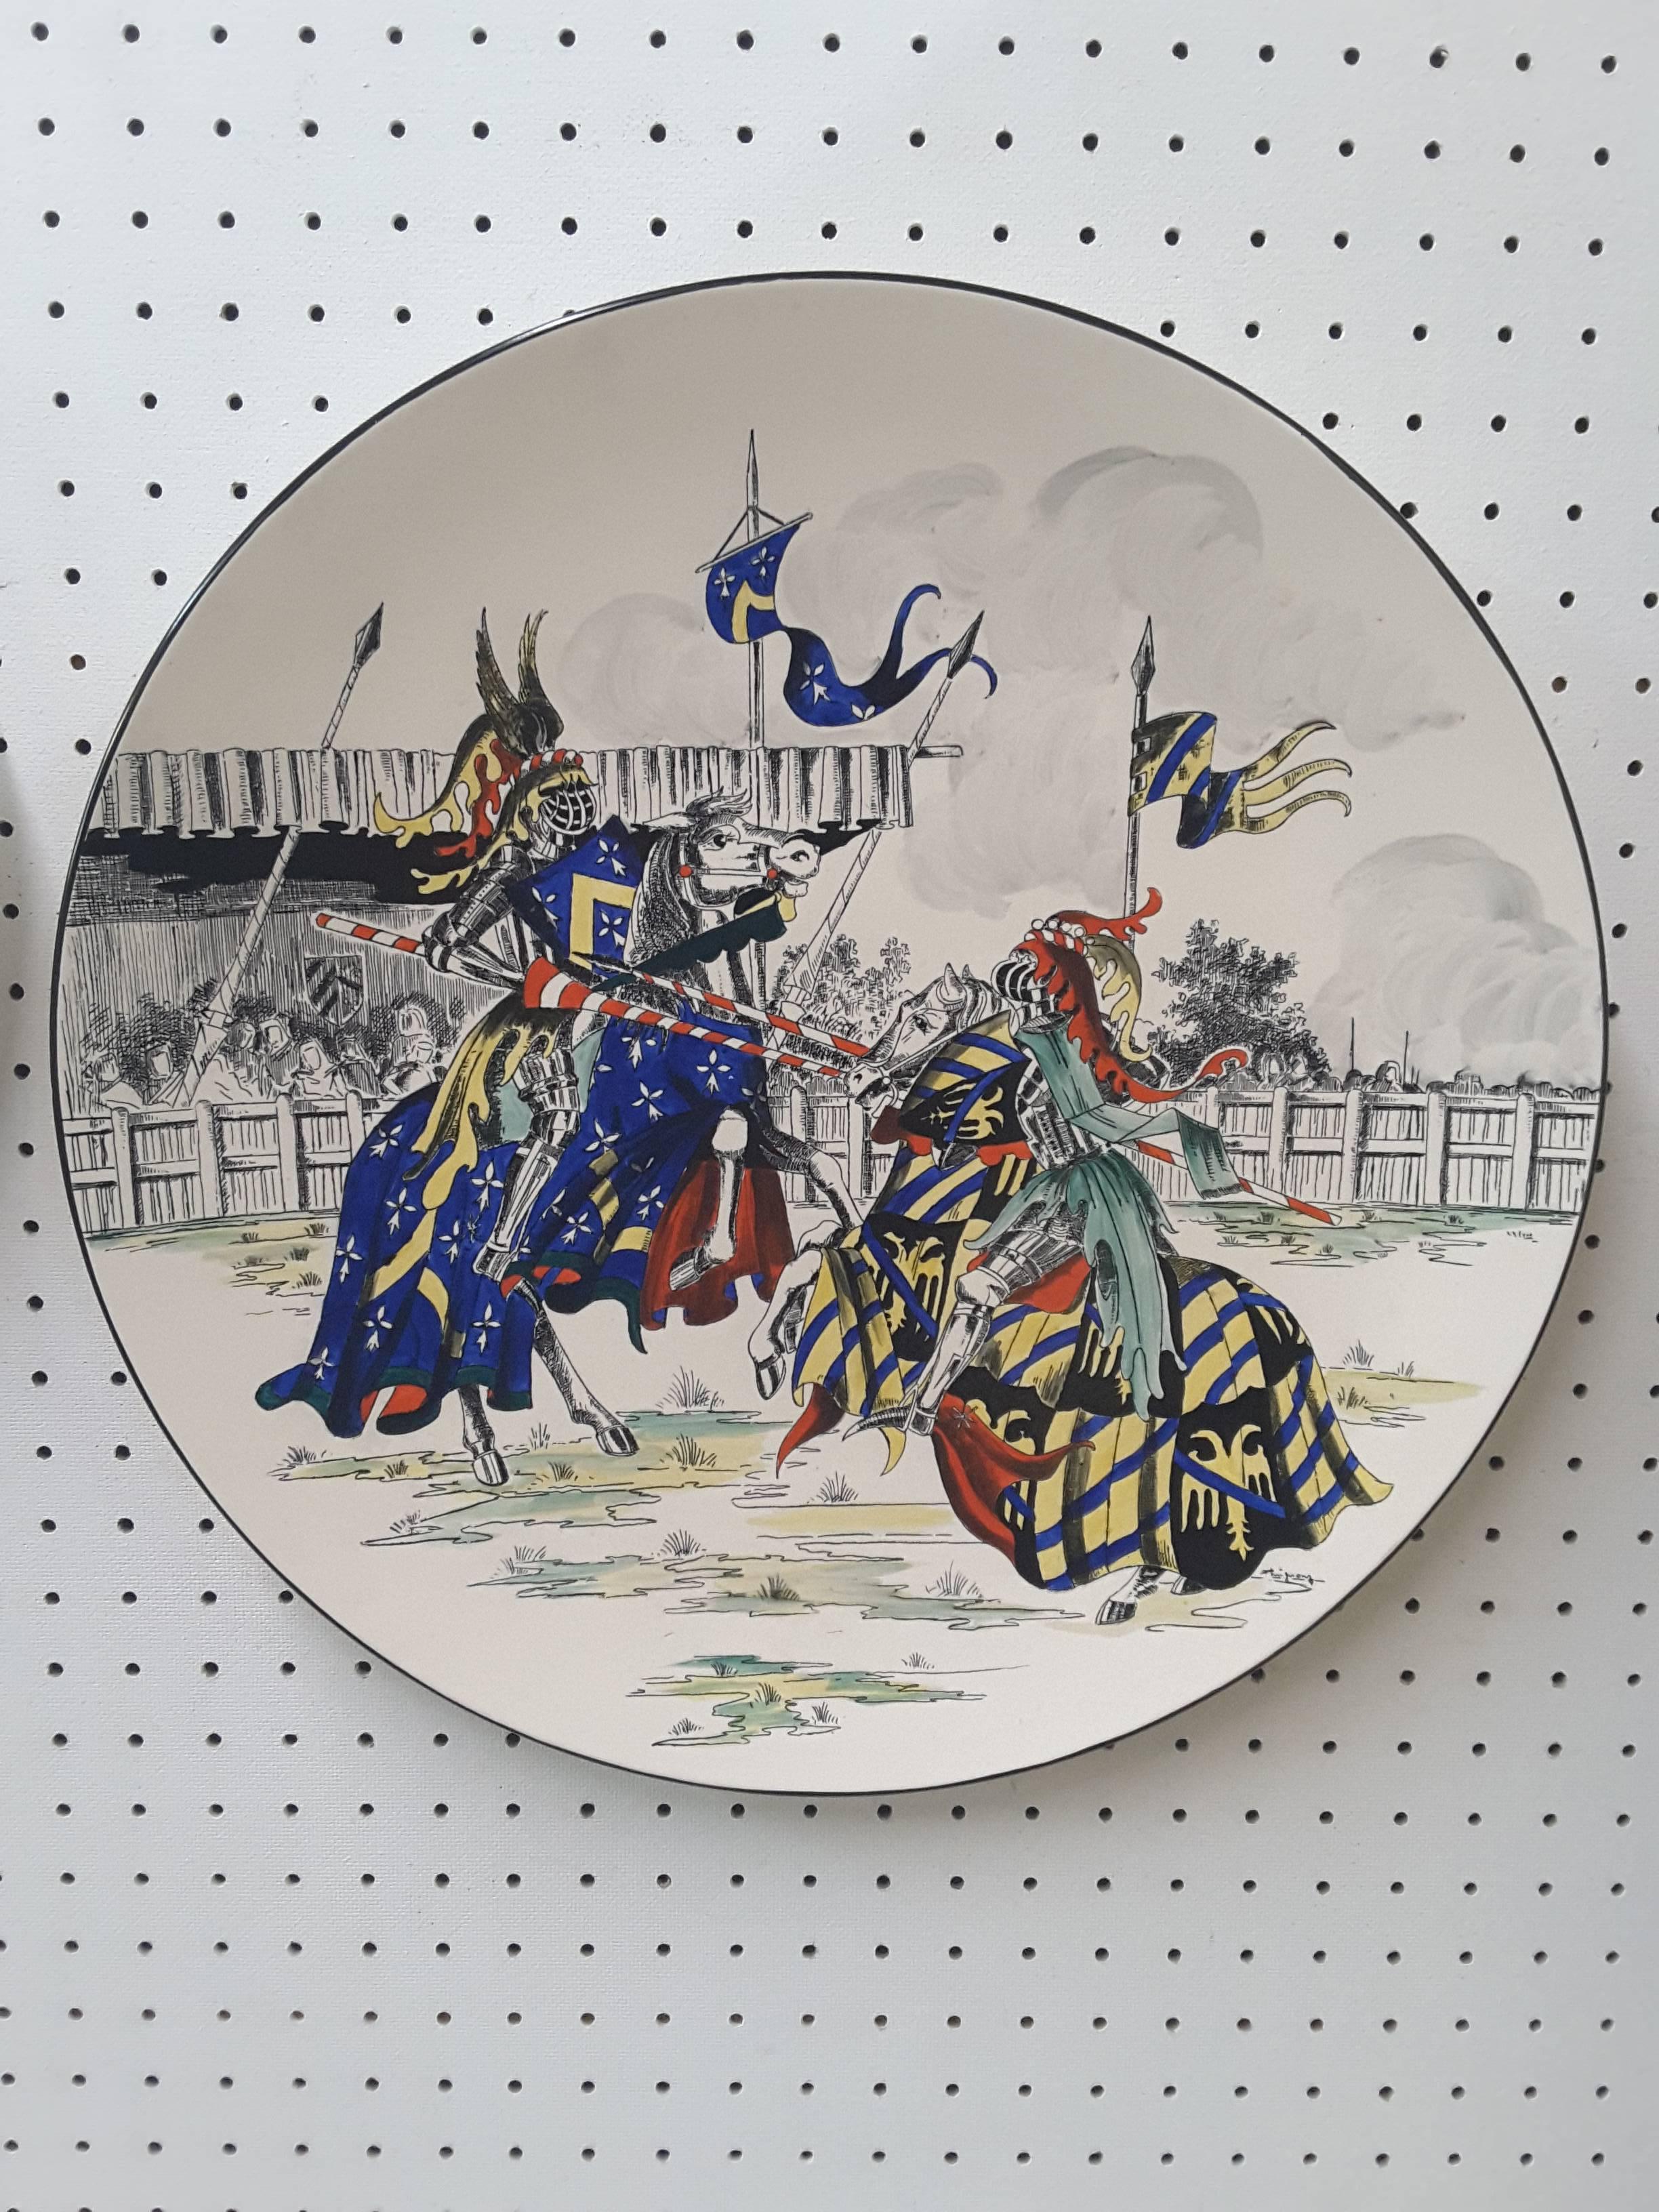 Pair of large longwy medival scene painted, 1950s chargers, each charger has a medival jousting tournament scene, (typical of 1950s decor) The chargers measure 18